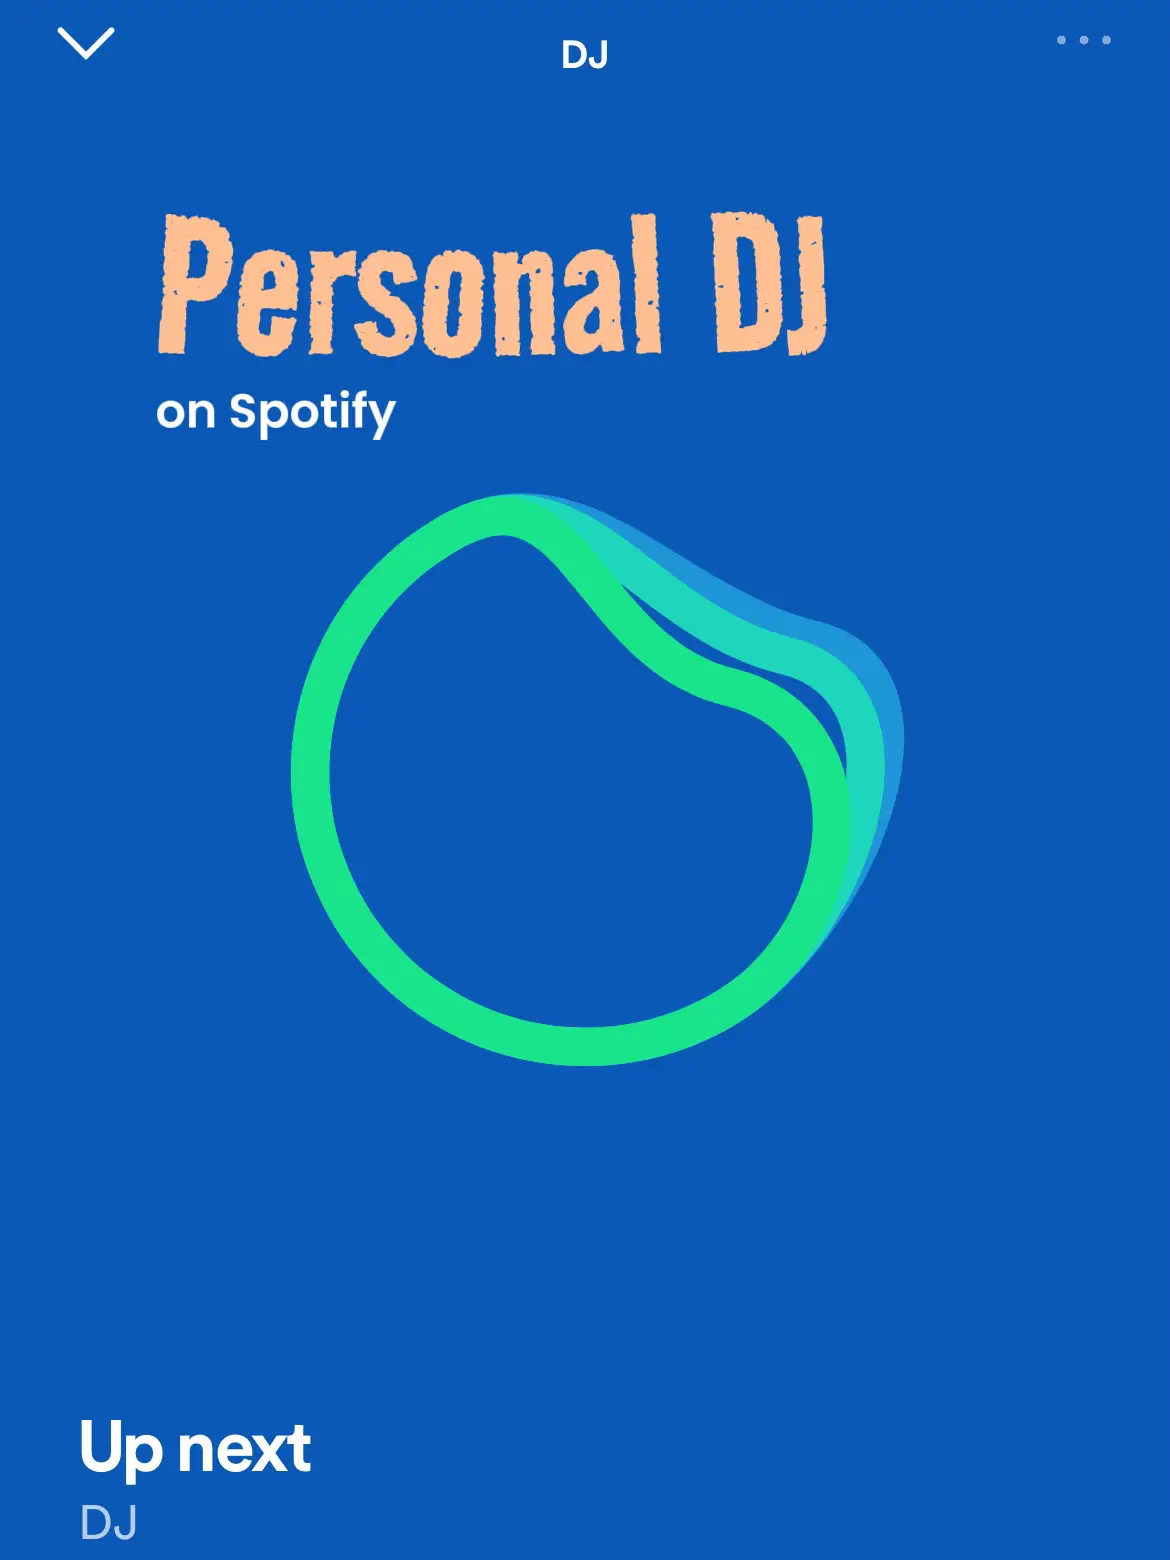 Personal DJ?????'s images(0)